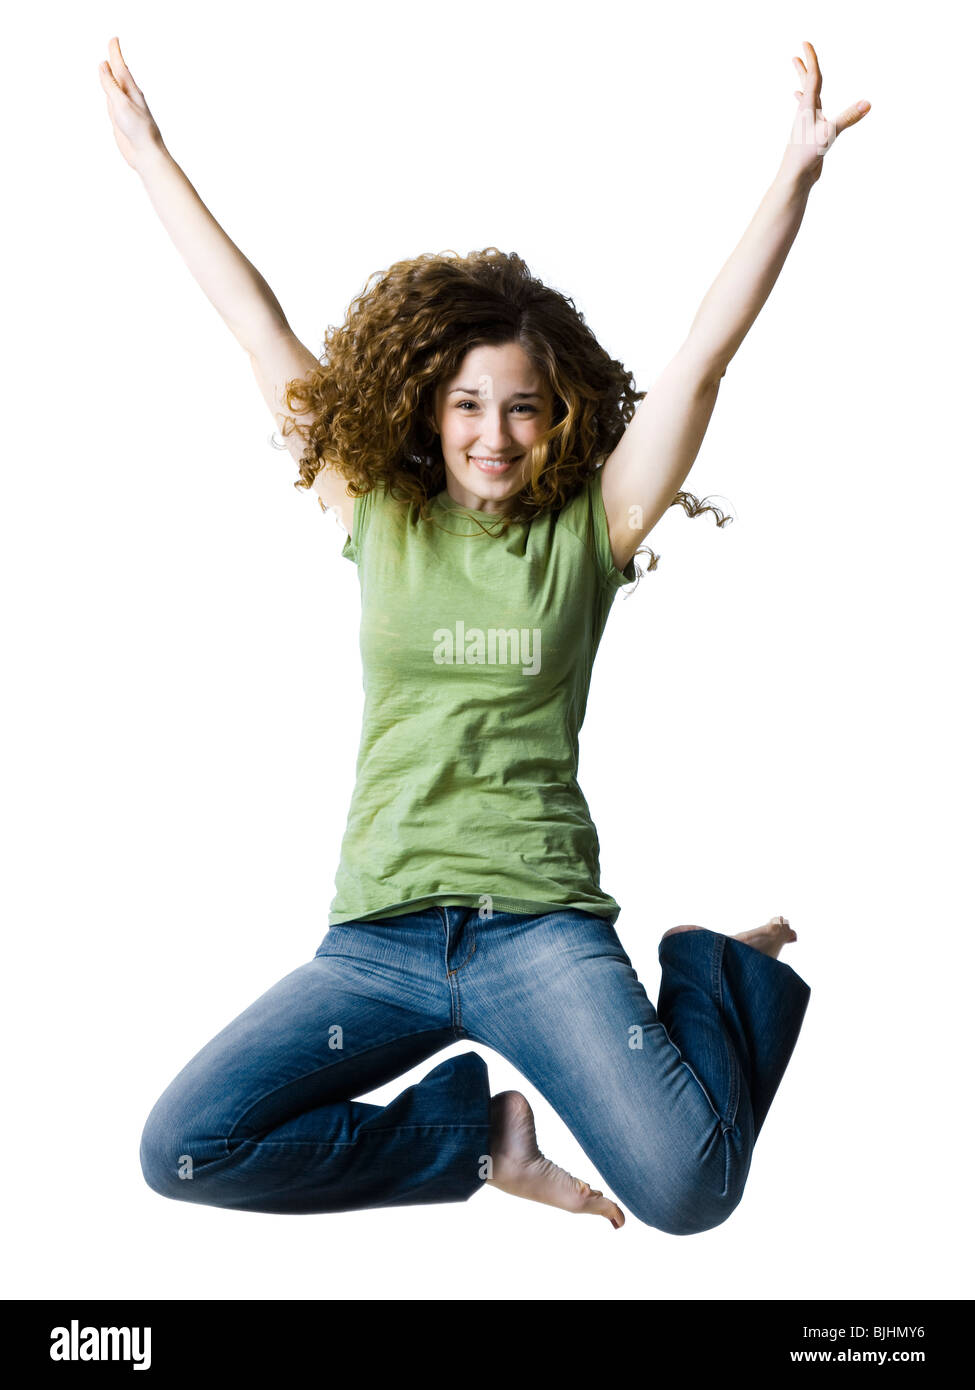 woman jumping with her arms raised in the air Stock Photo